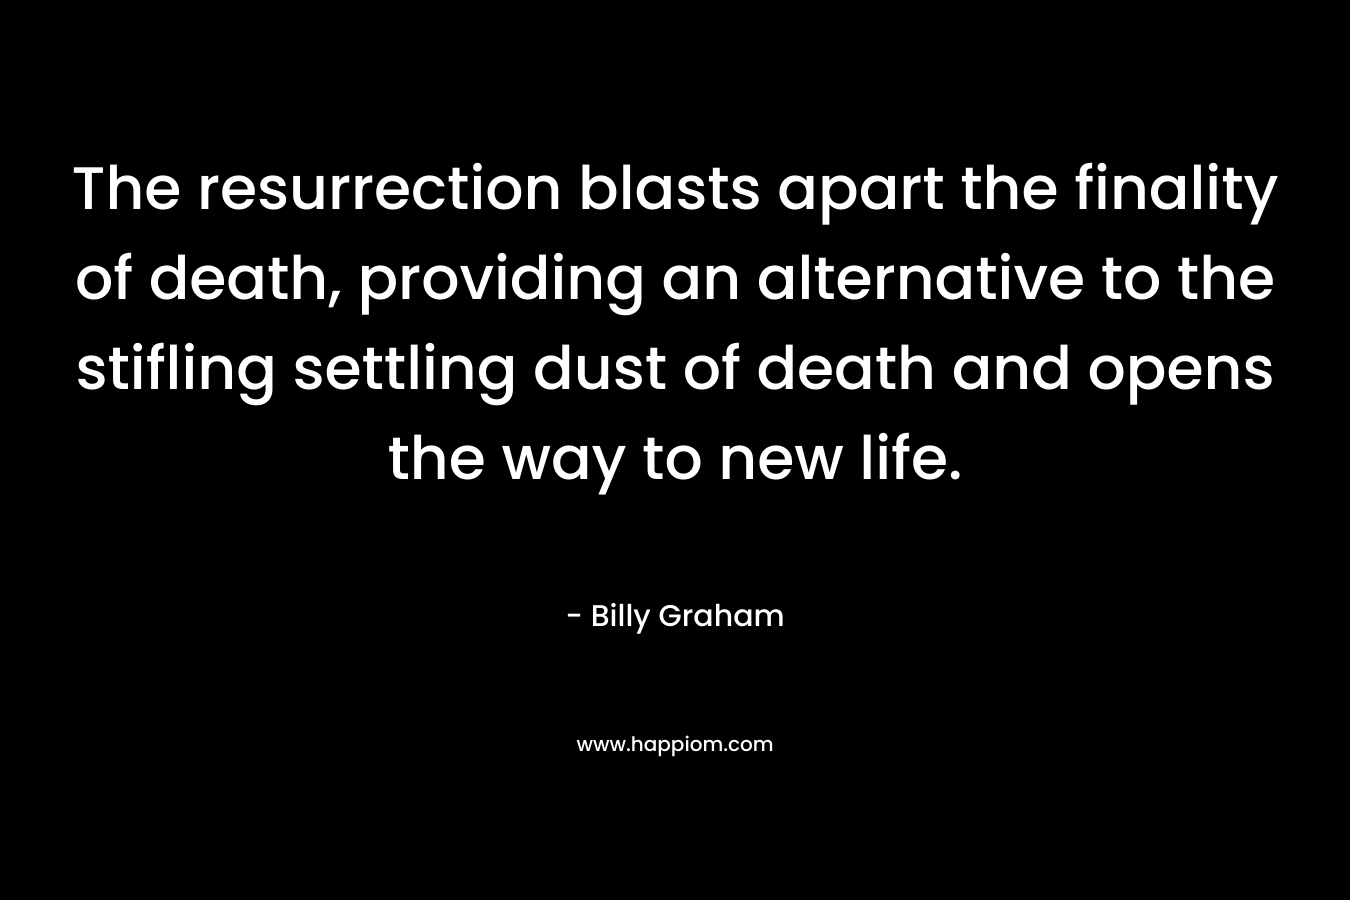 The resurrection blasts apart the finality of death, providing an alternative to the stifling settling dust of death and opens the way to new life. – Billy Graham